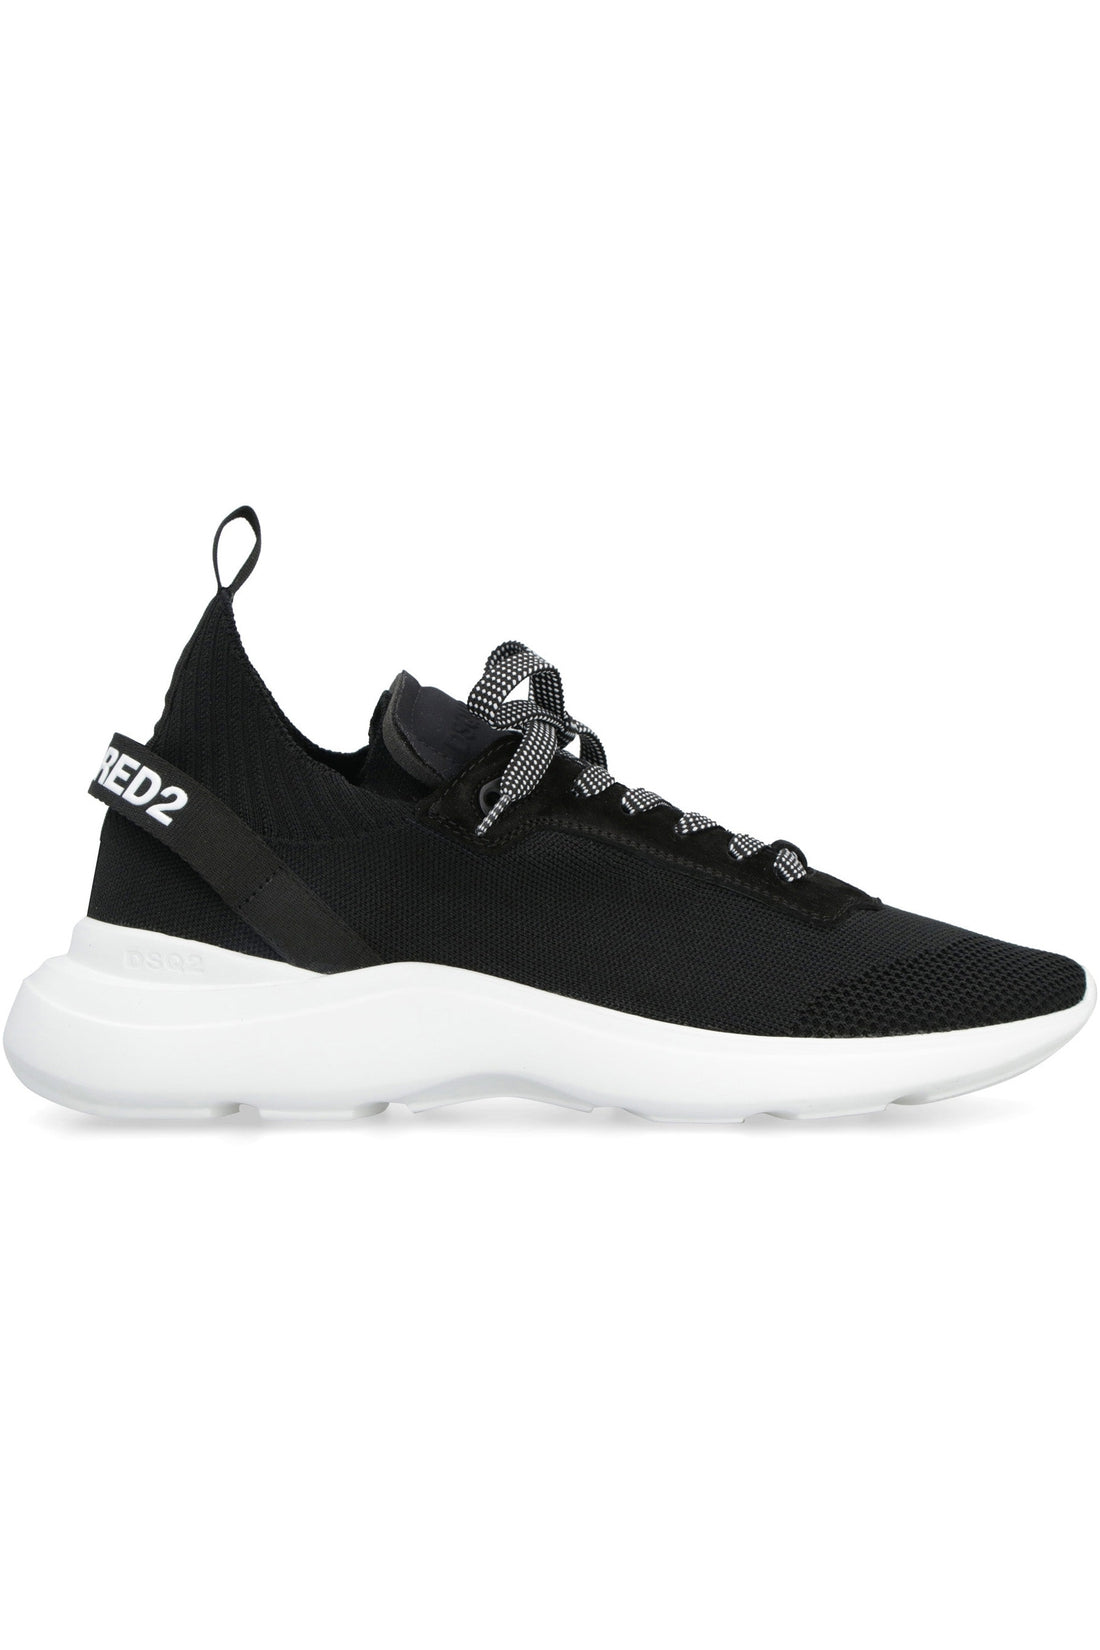 Dsquared2-OUTLET-SALE-Fly running sneakers-ARCHIVIST